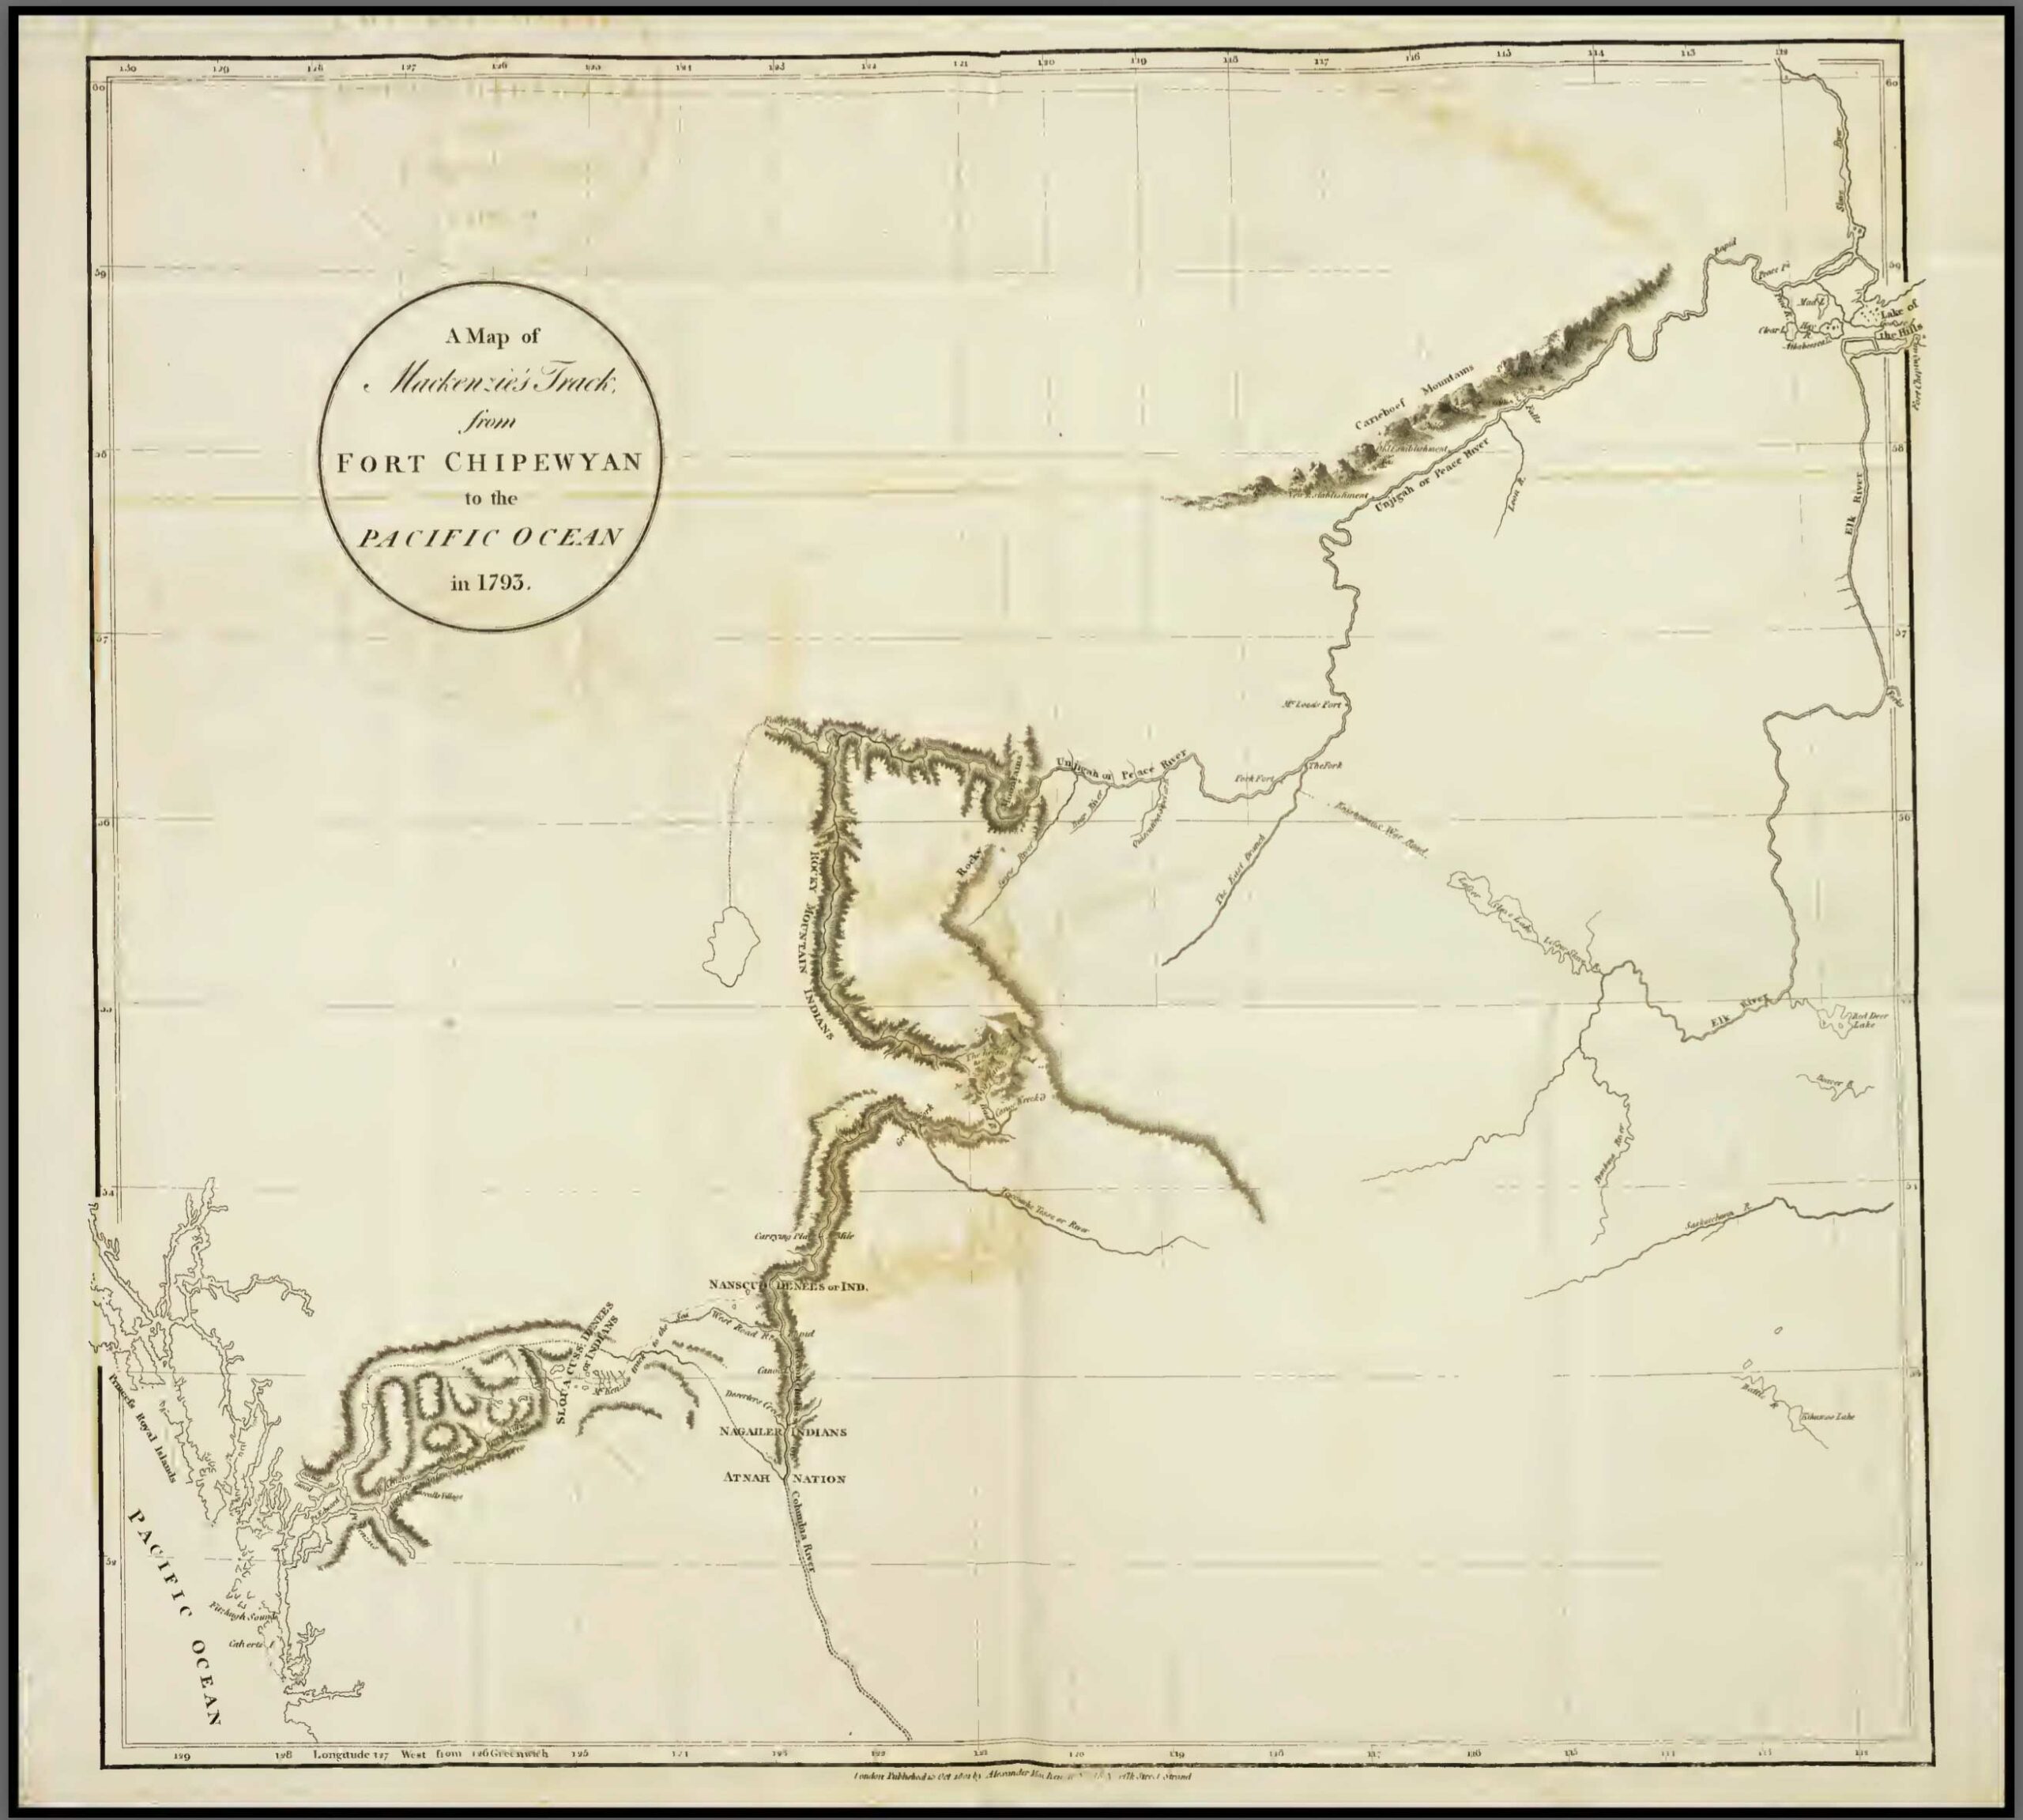 A map of Mackenzie’s track from Fort Chipewan to the Pacific Ocean in 1793